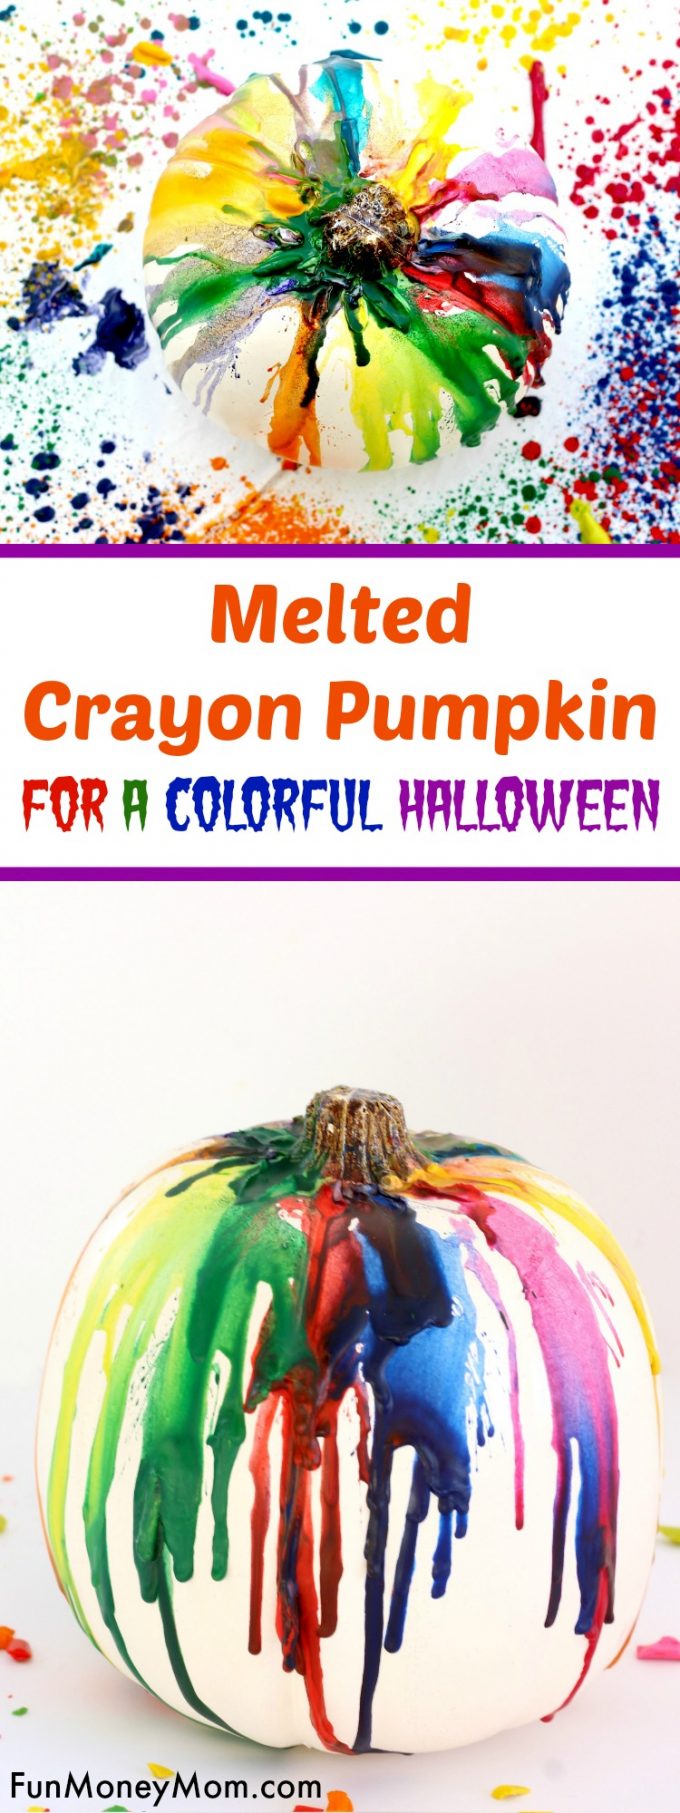 Want a great, no carve pumpkin idea for Halloween? This colorful melted crayon pumpkin is so much fun to make that you may not be able to stop at just one!